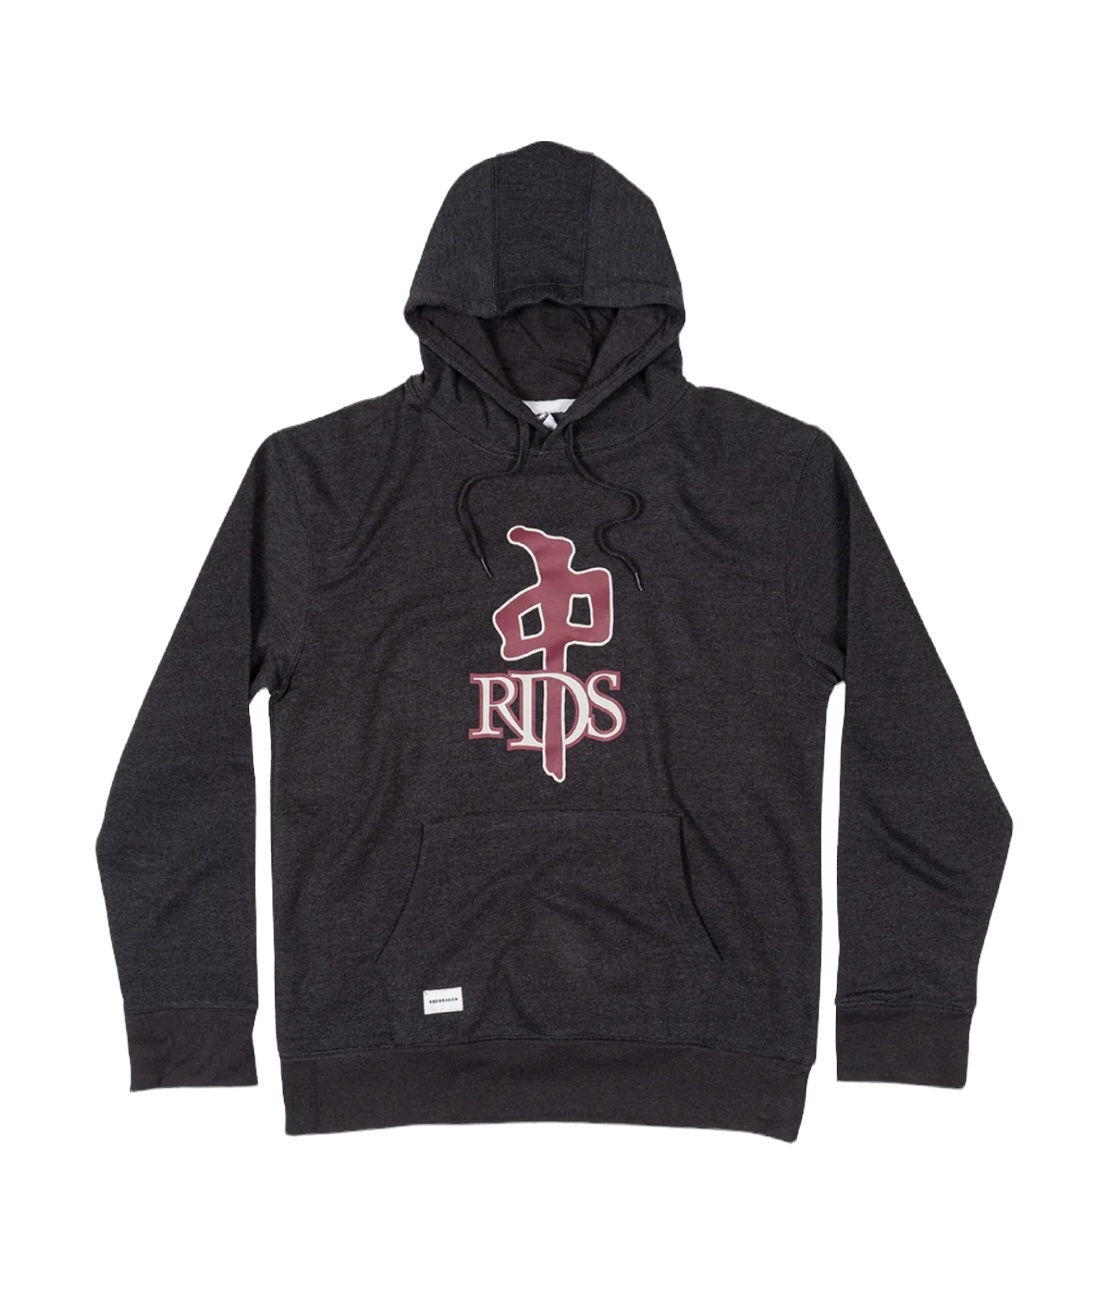 RDS OG PO HOODY BLACK HEATHER/MAROON - Laces